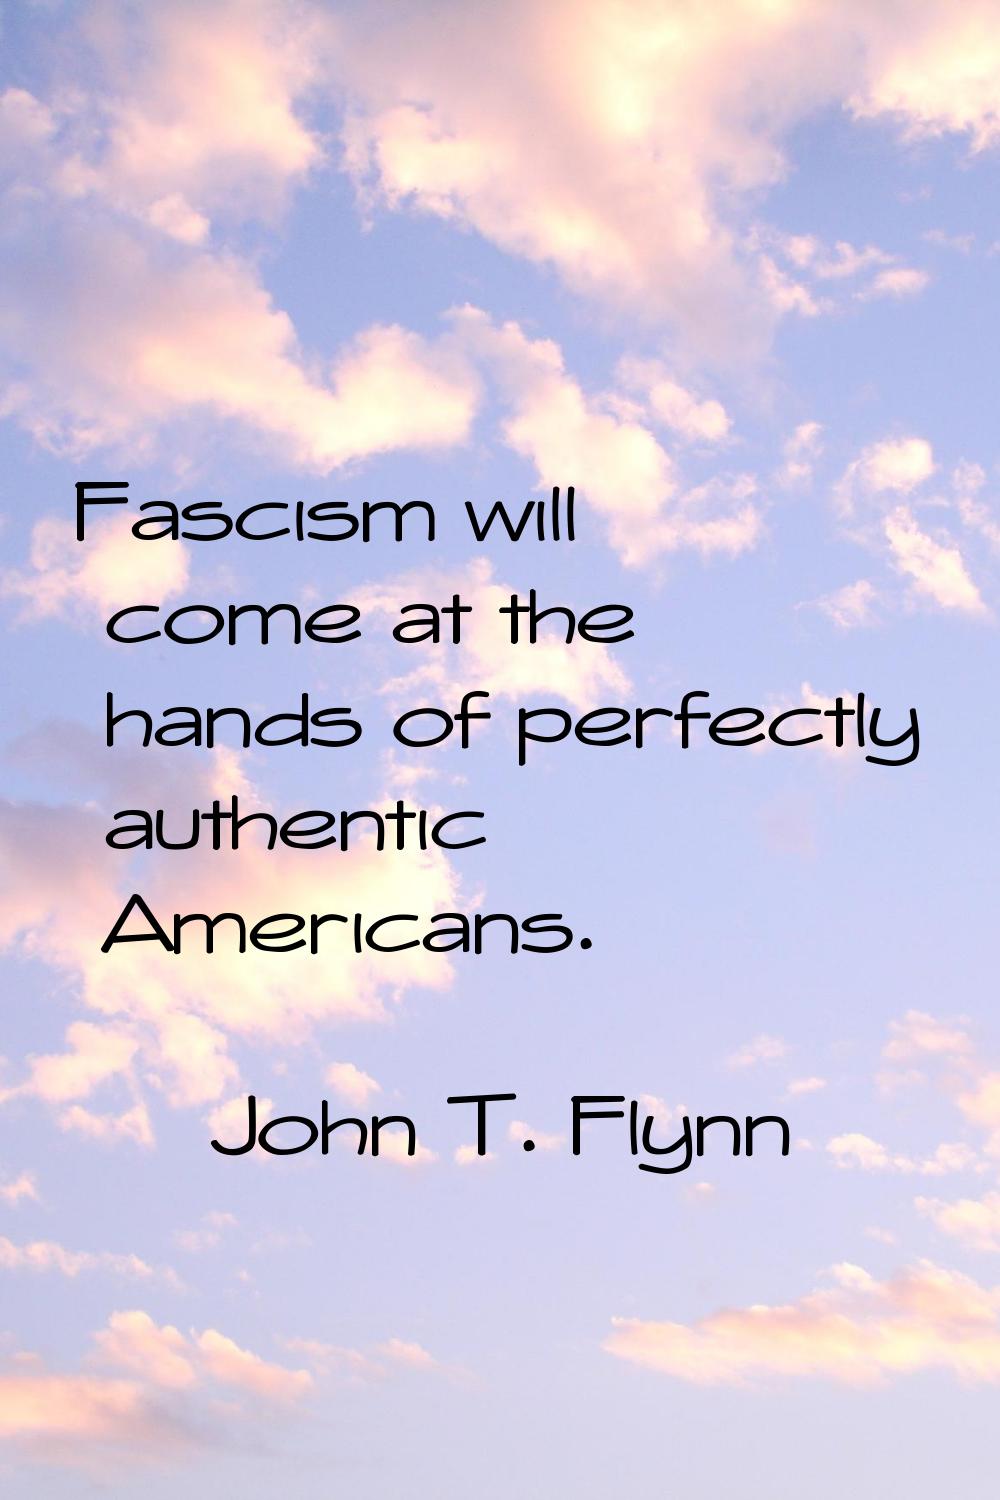 Fascism will come at the hands of perfectly authentic Americans.